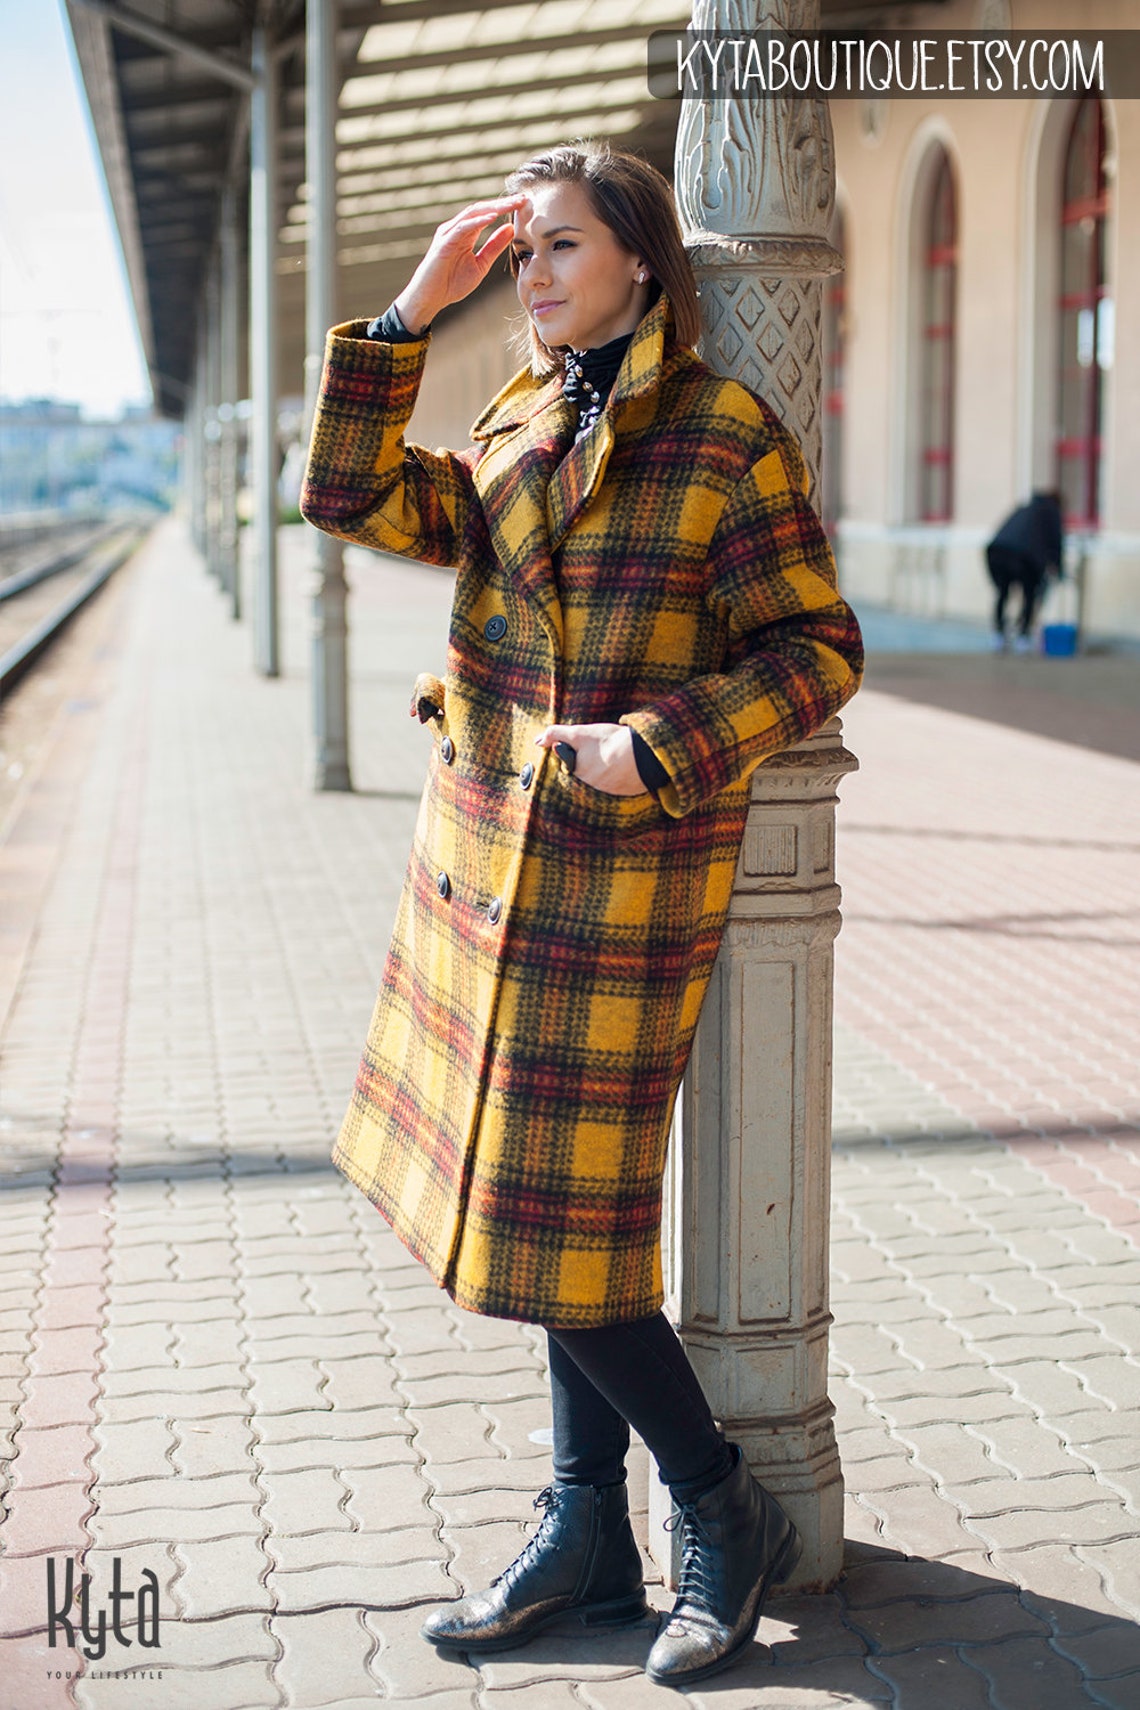 Womens Plaid Wool Coat for Fall Vintage Style Plaid Coat - Etsy